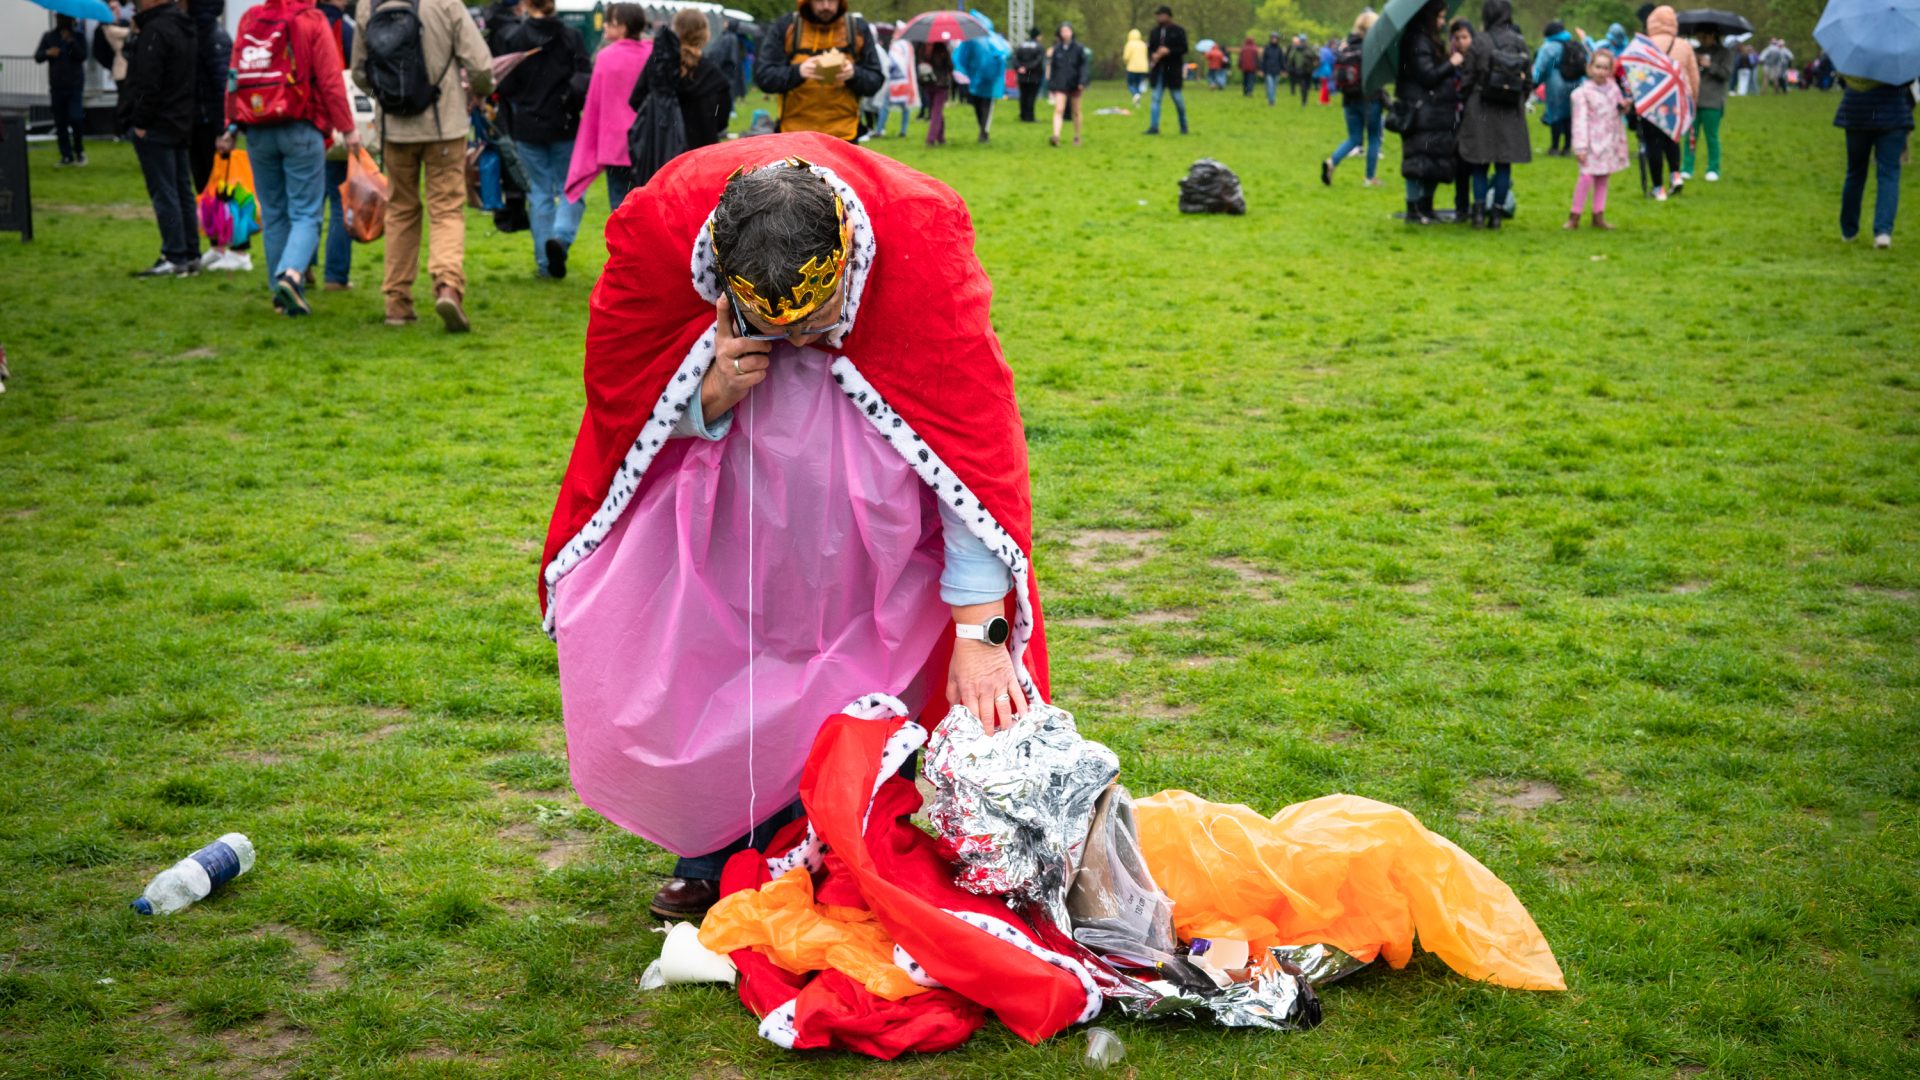 A man dressed in a royal gown and cape pictured in the park.